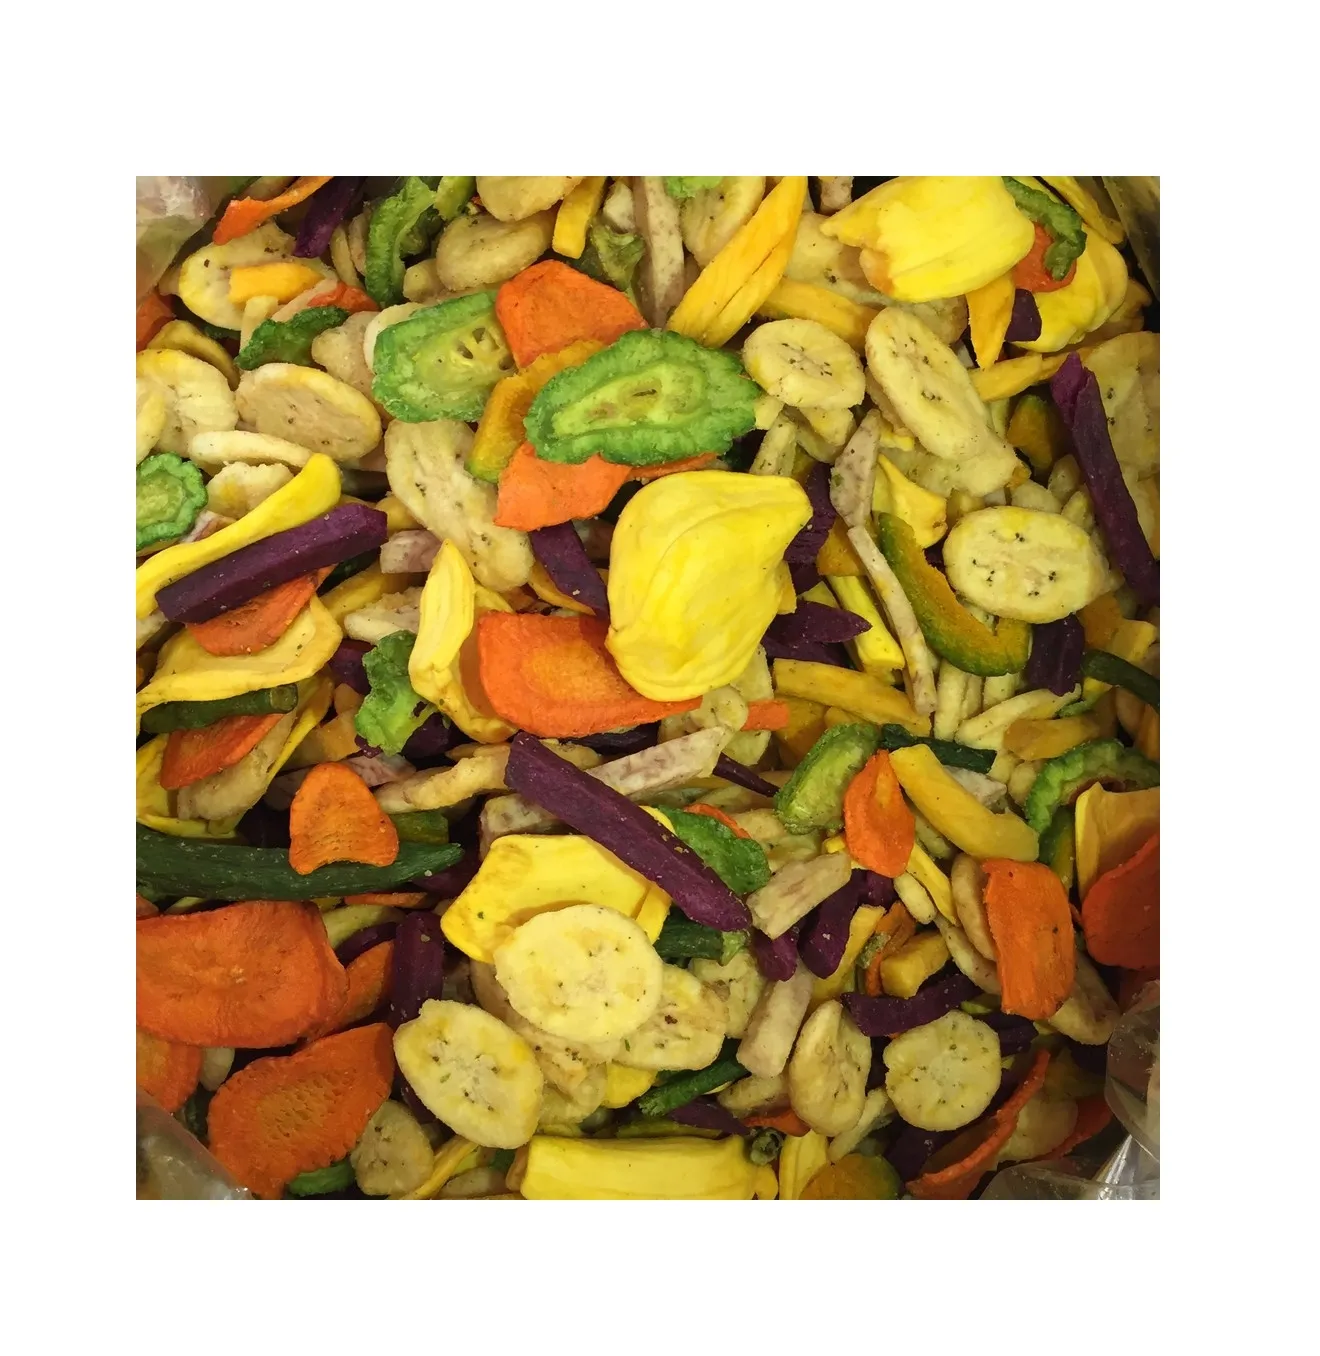 High quality 100% natural vegetable and fruit mix Dried Fruits and Vegetables Chips for snack Best Price